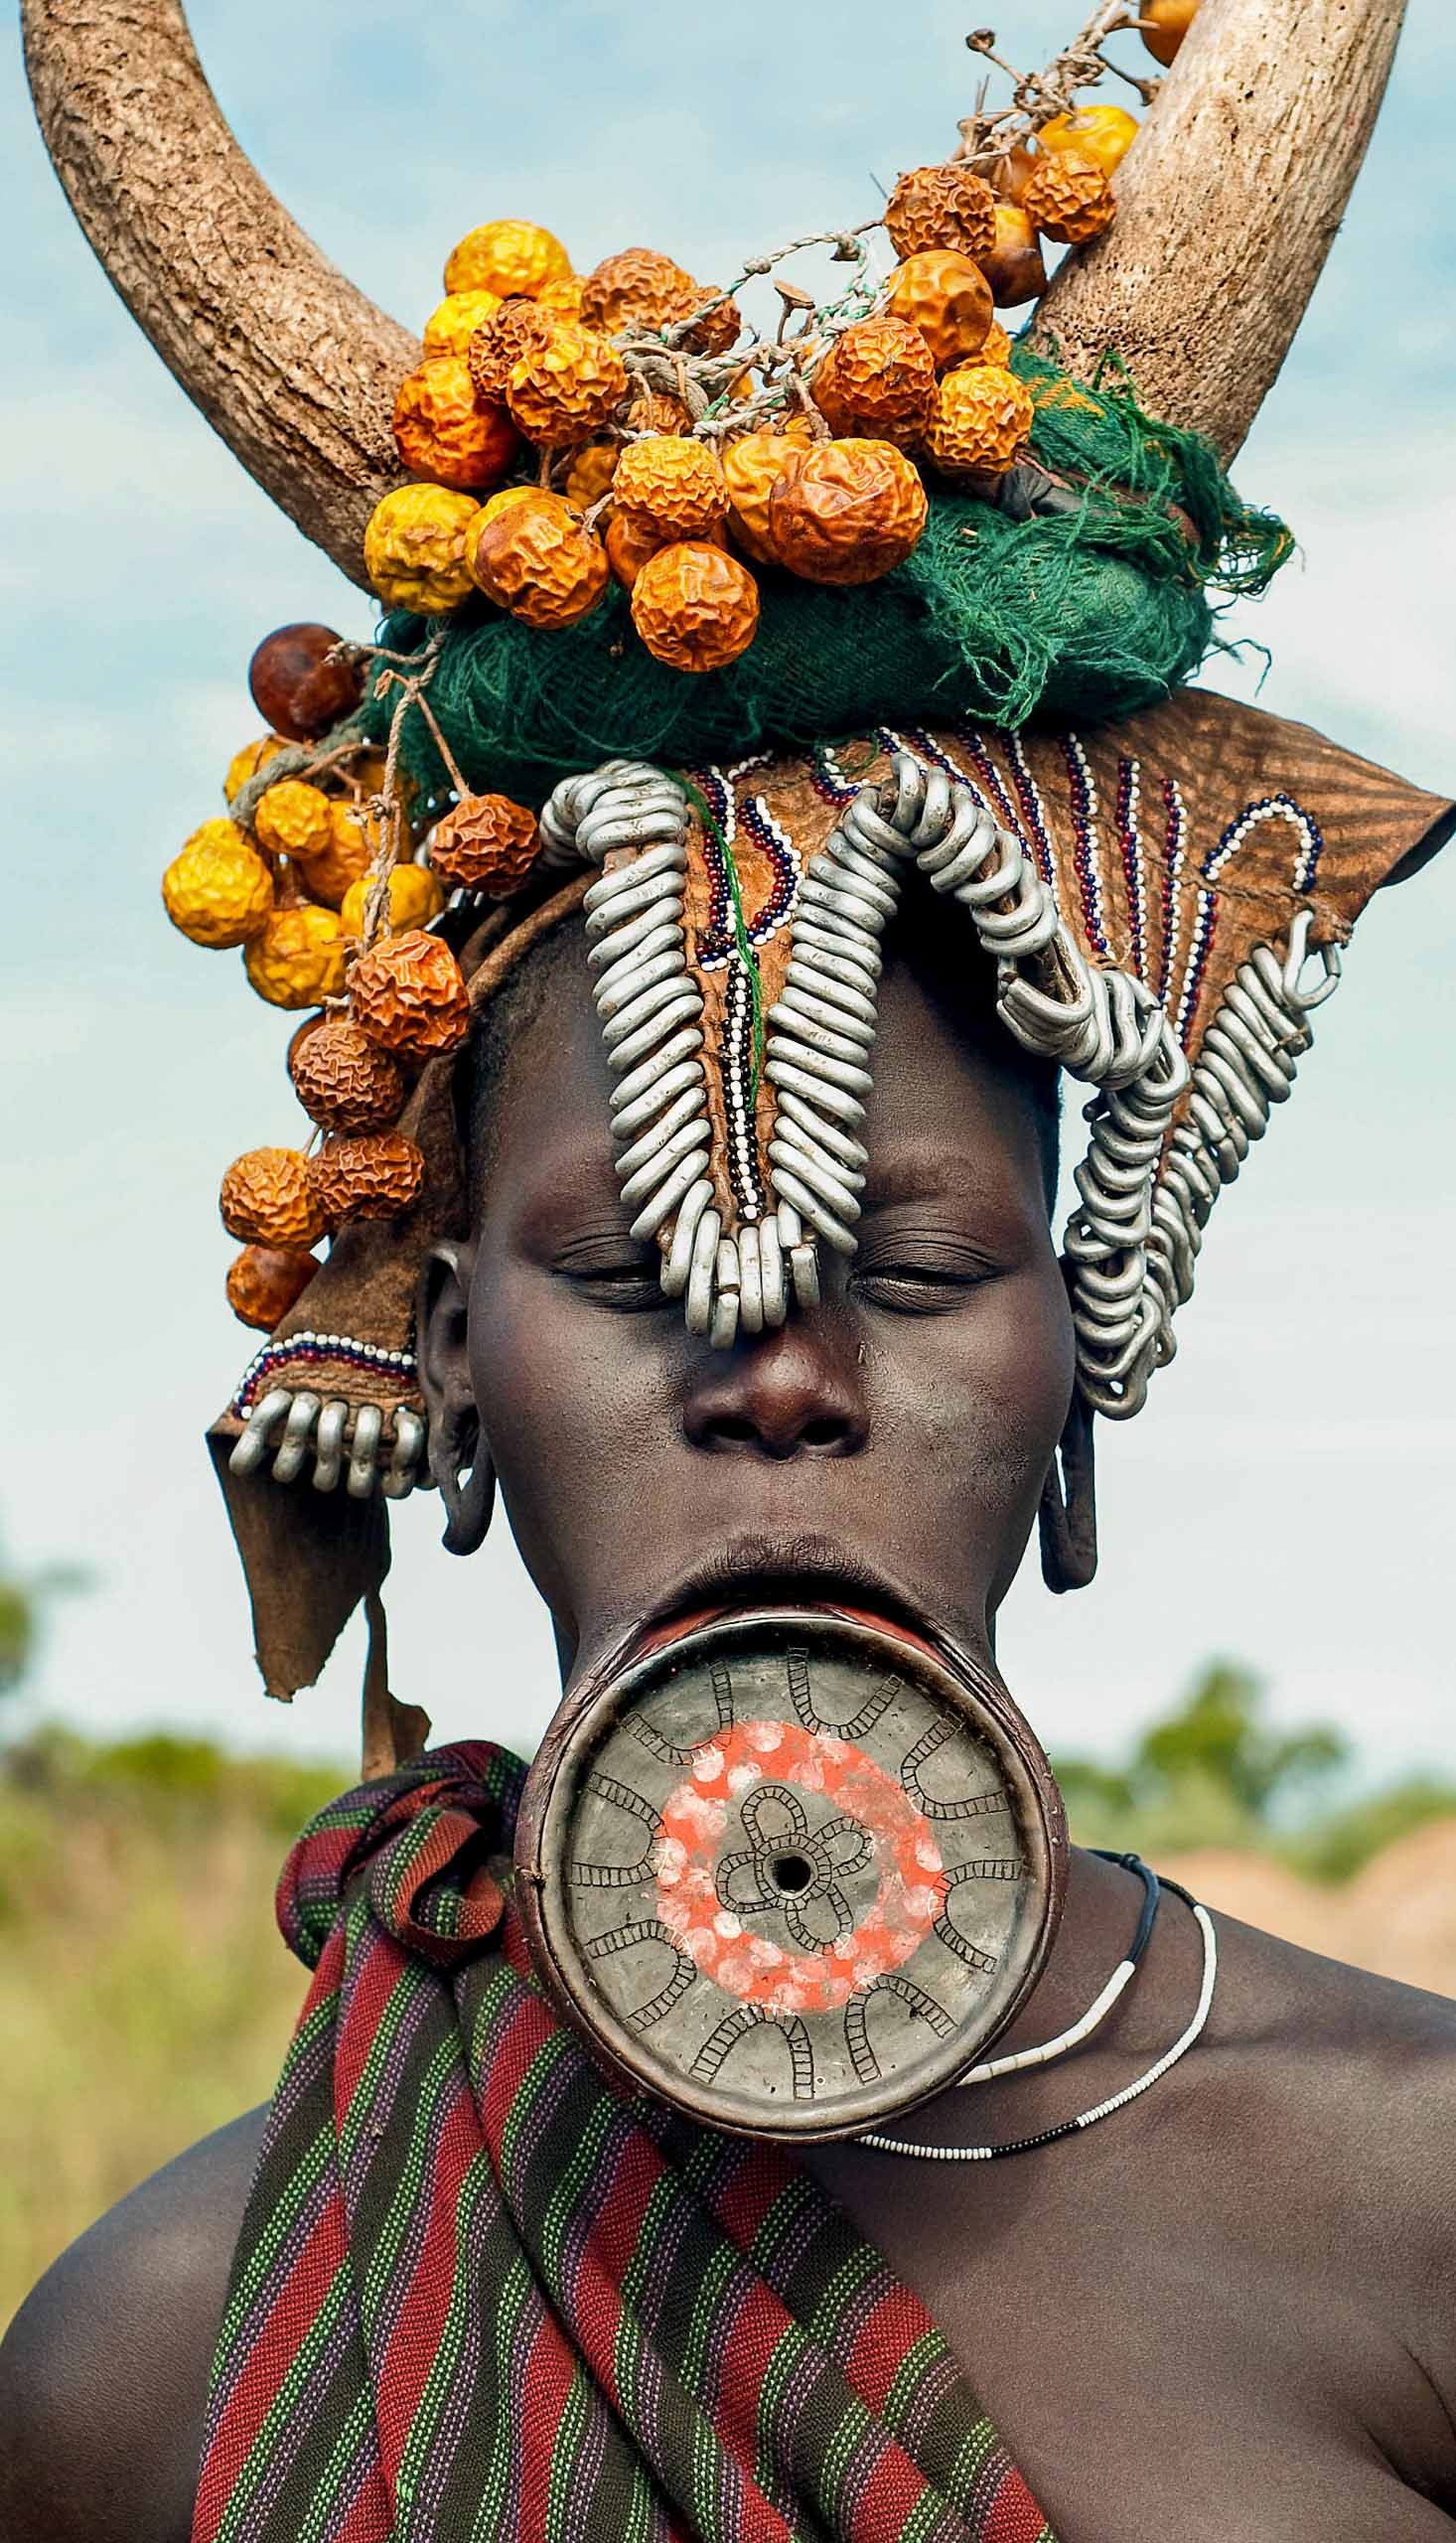 Woman from the Mursi tribe in Ethiopia.